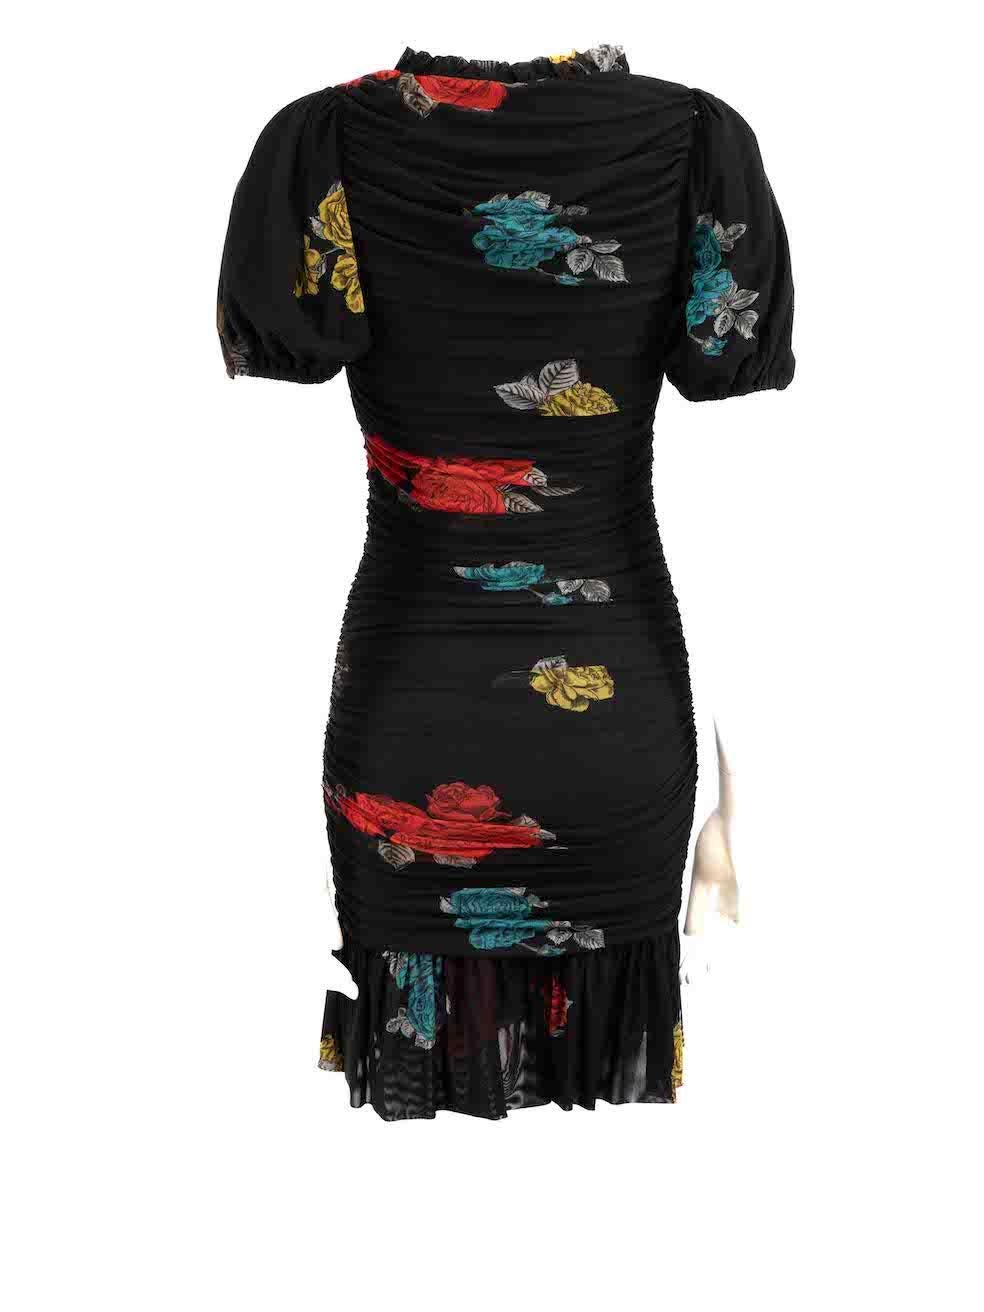 Ganni Black Floral Print Ruched Bodycon Dress Size S In Excellent Condition For Sale In London, GB